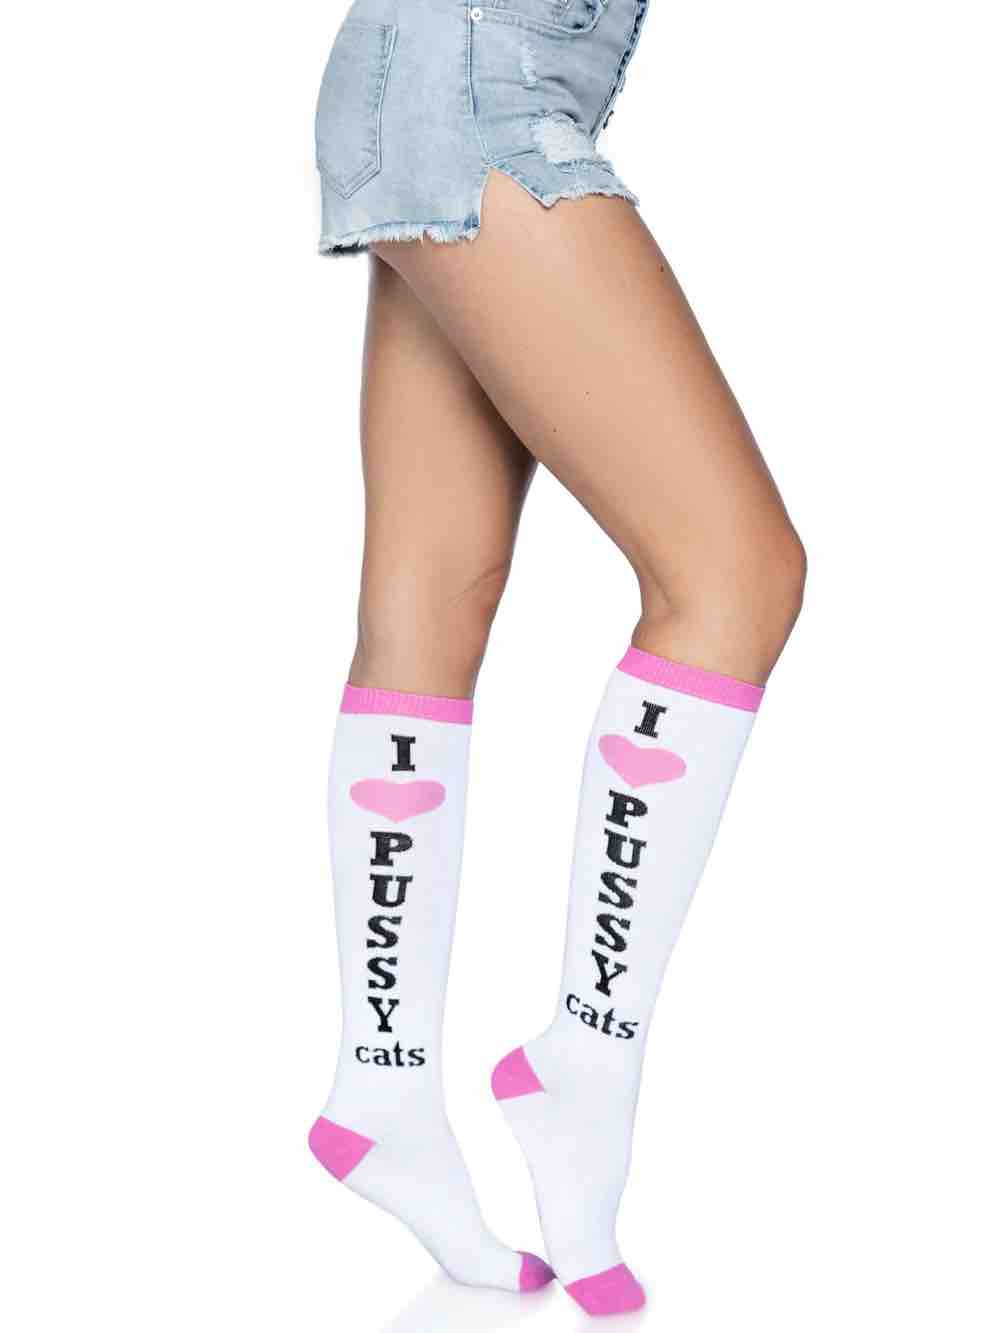 The Pussy Cat Socks on a model wearing jean shorts, side view.